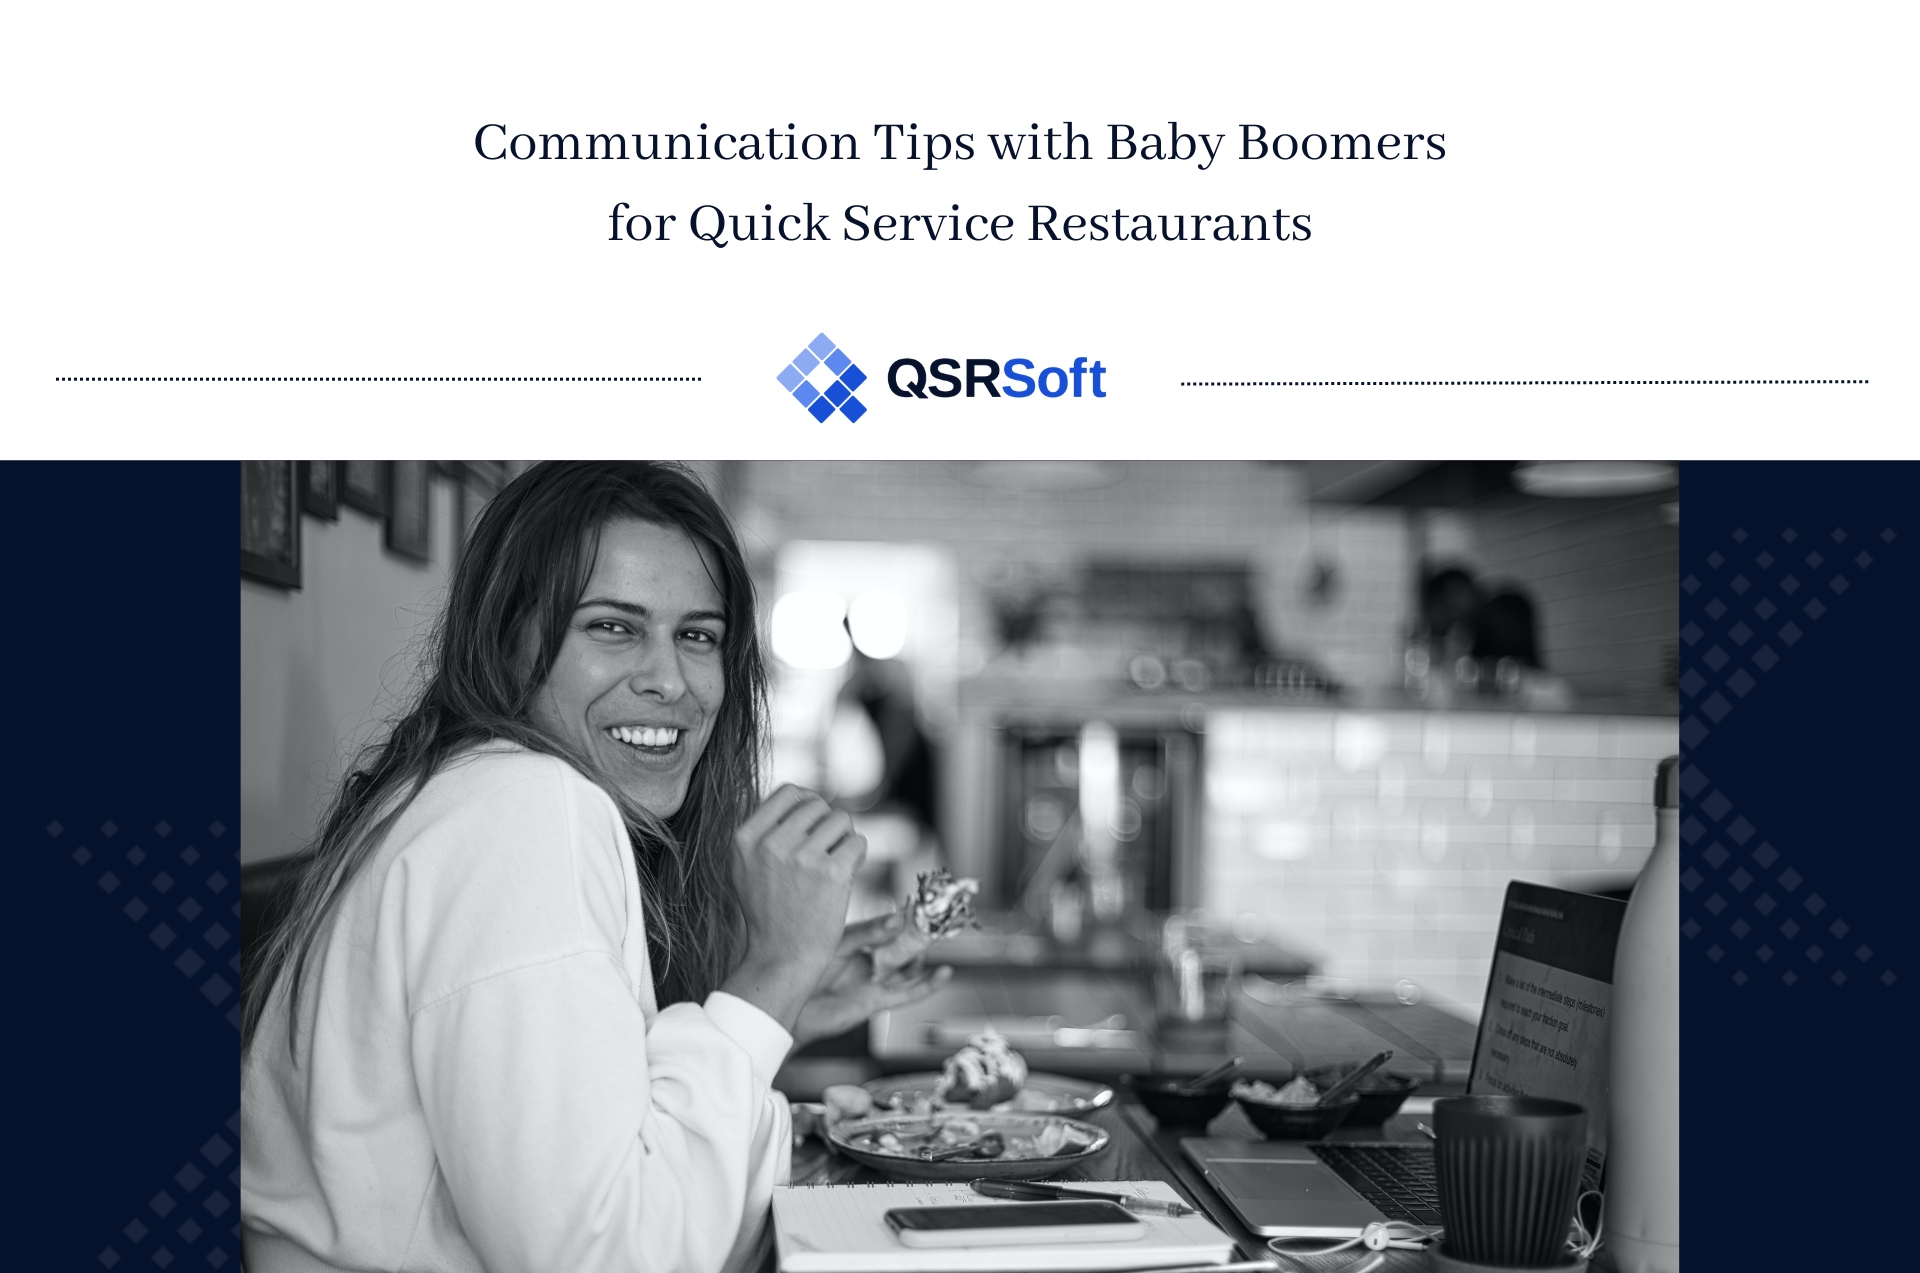 Communication Tips with Baby Boomers for Quick Service Restaurants